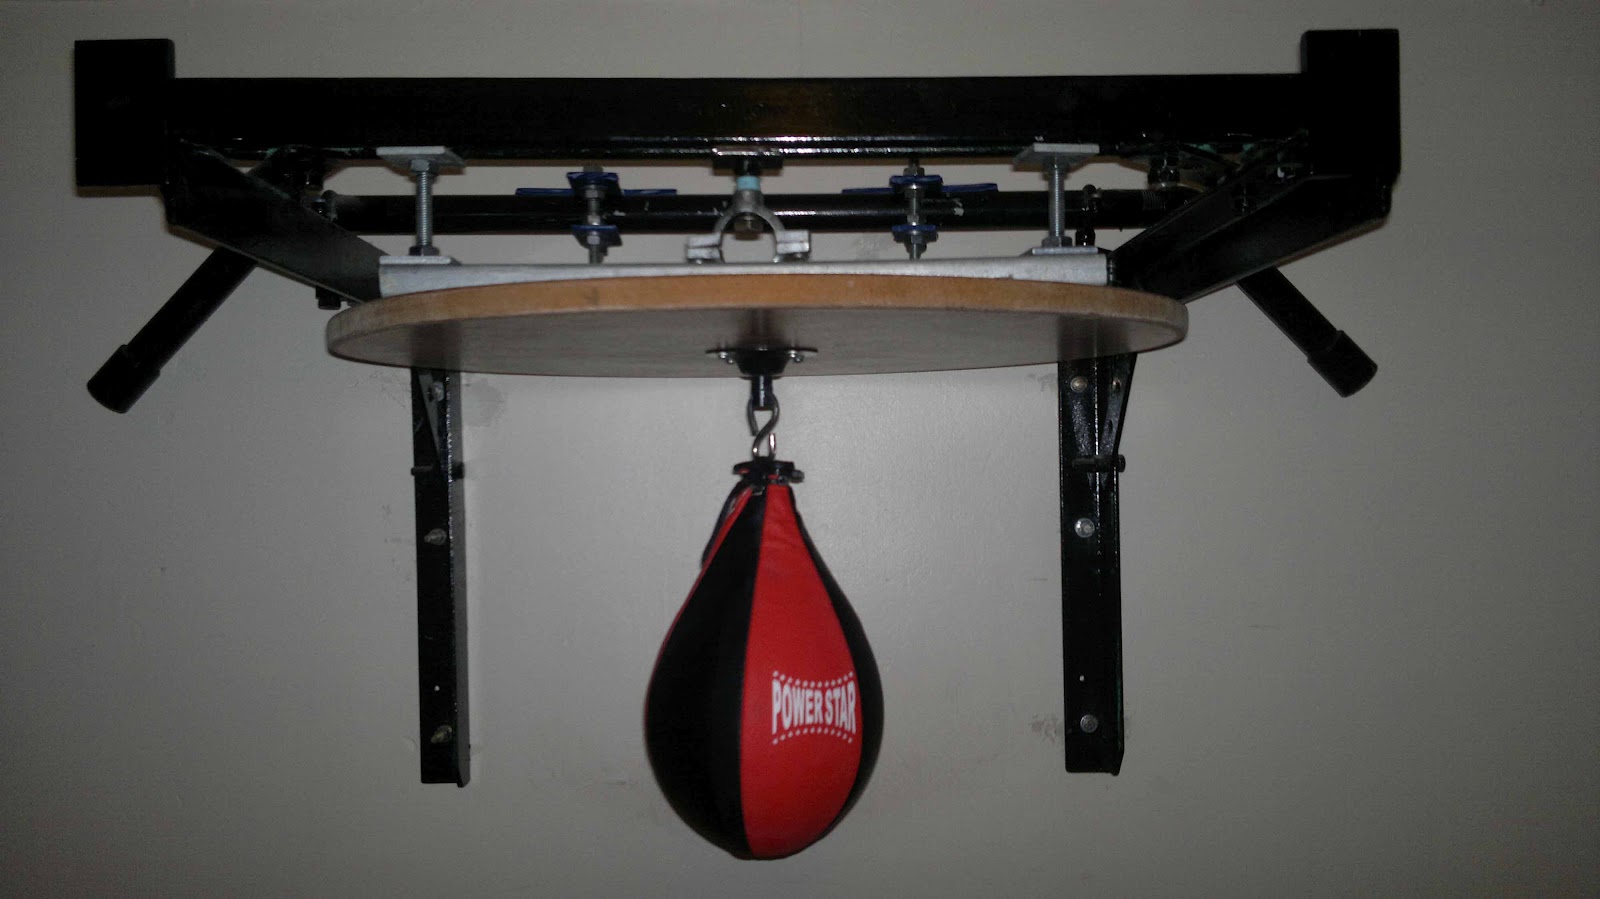 Setting up a speed bag at home | Free For All Striking Techniques